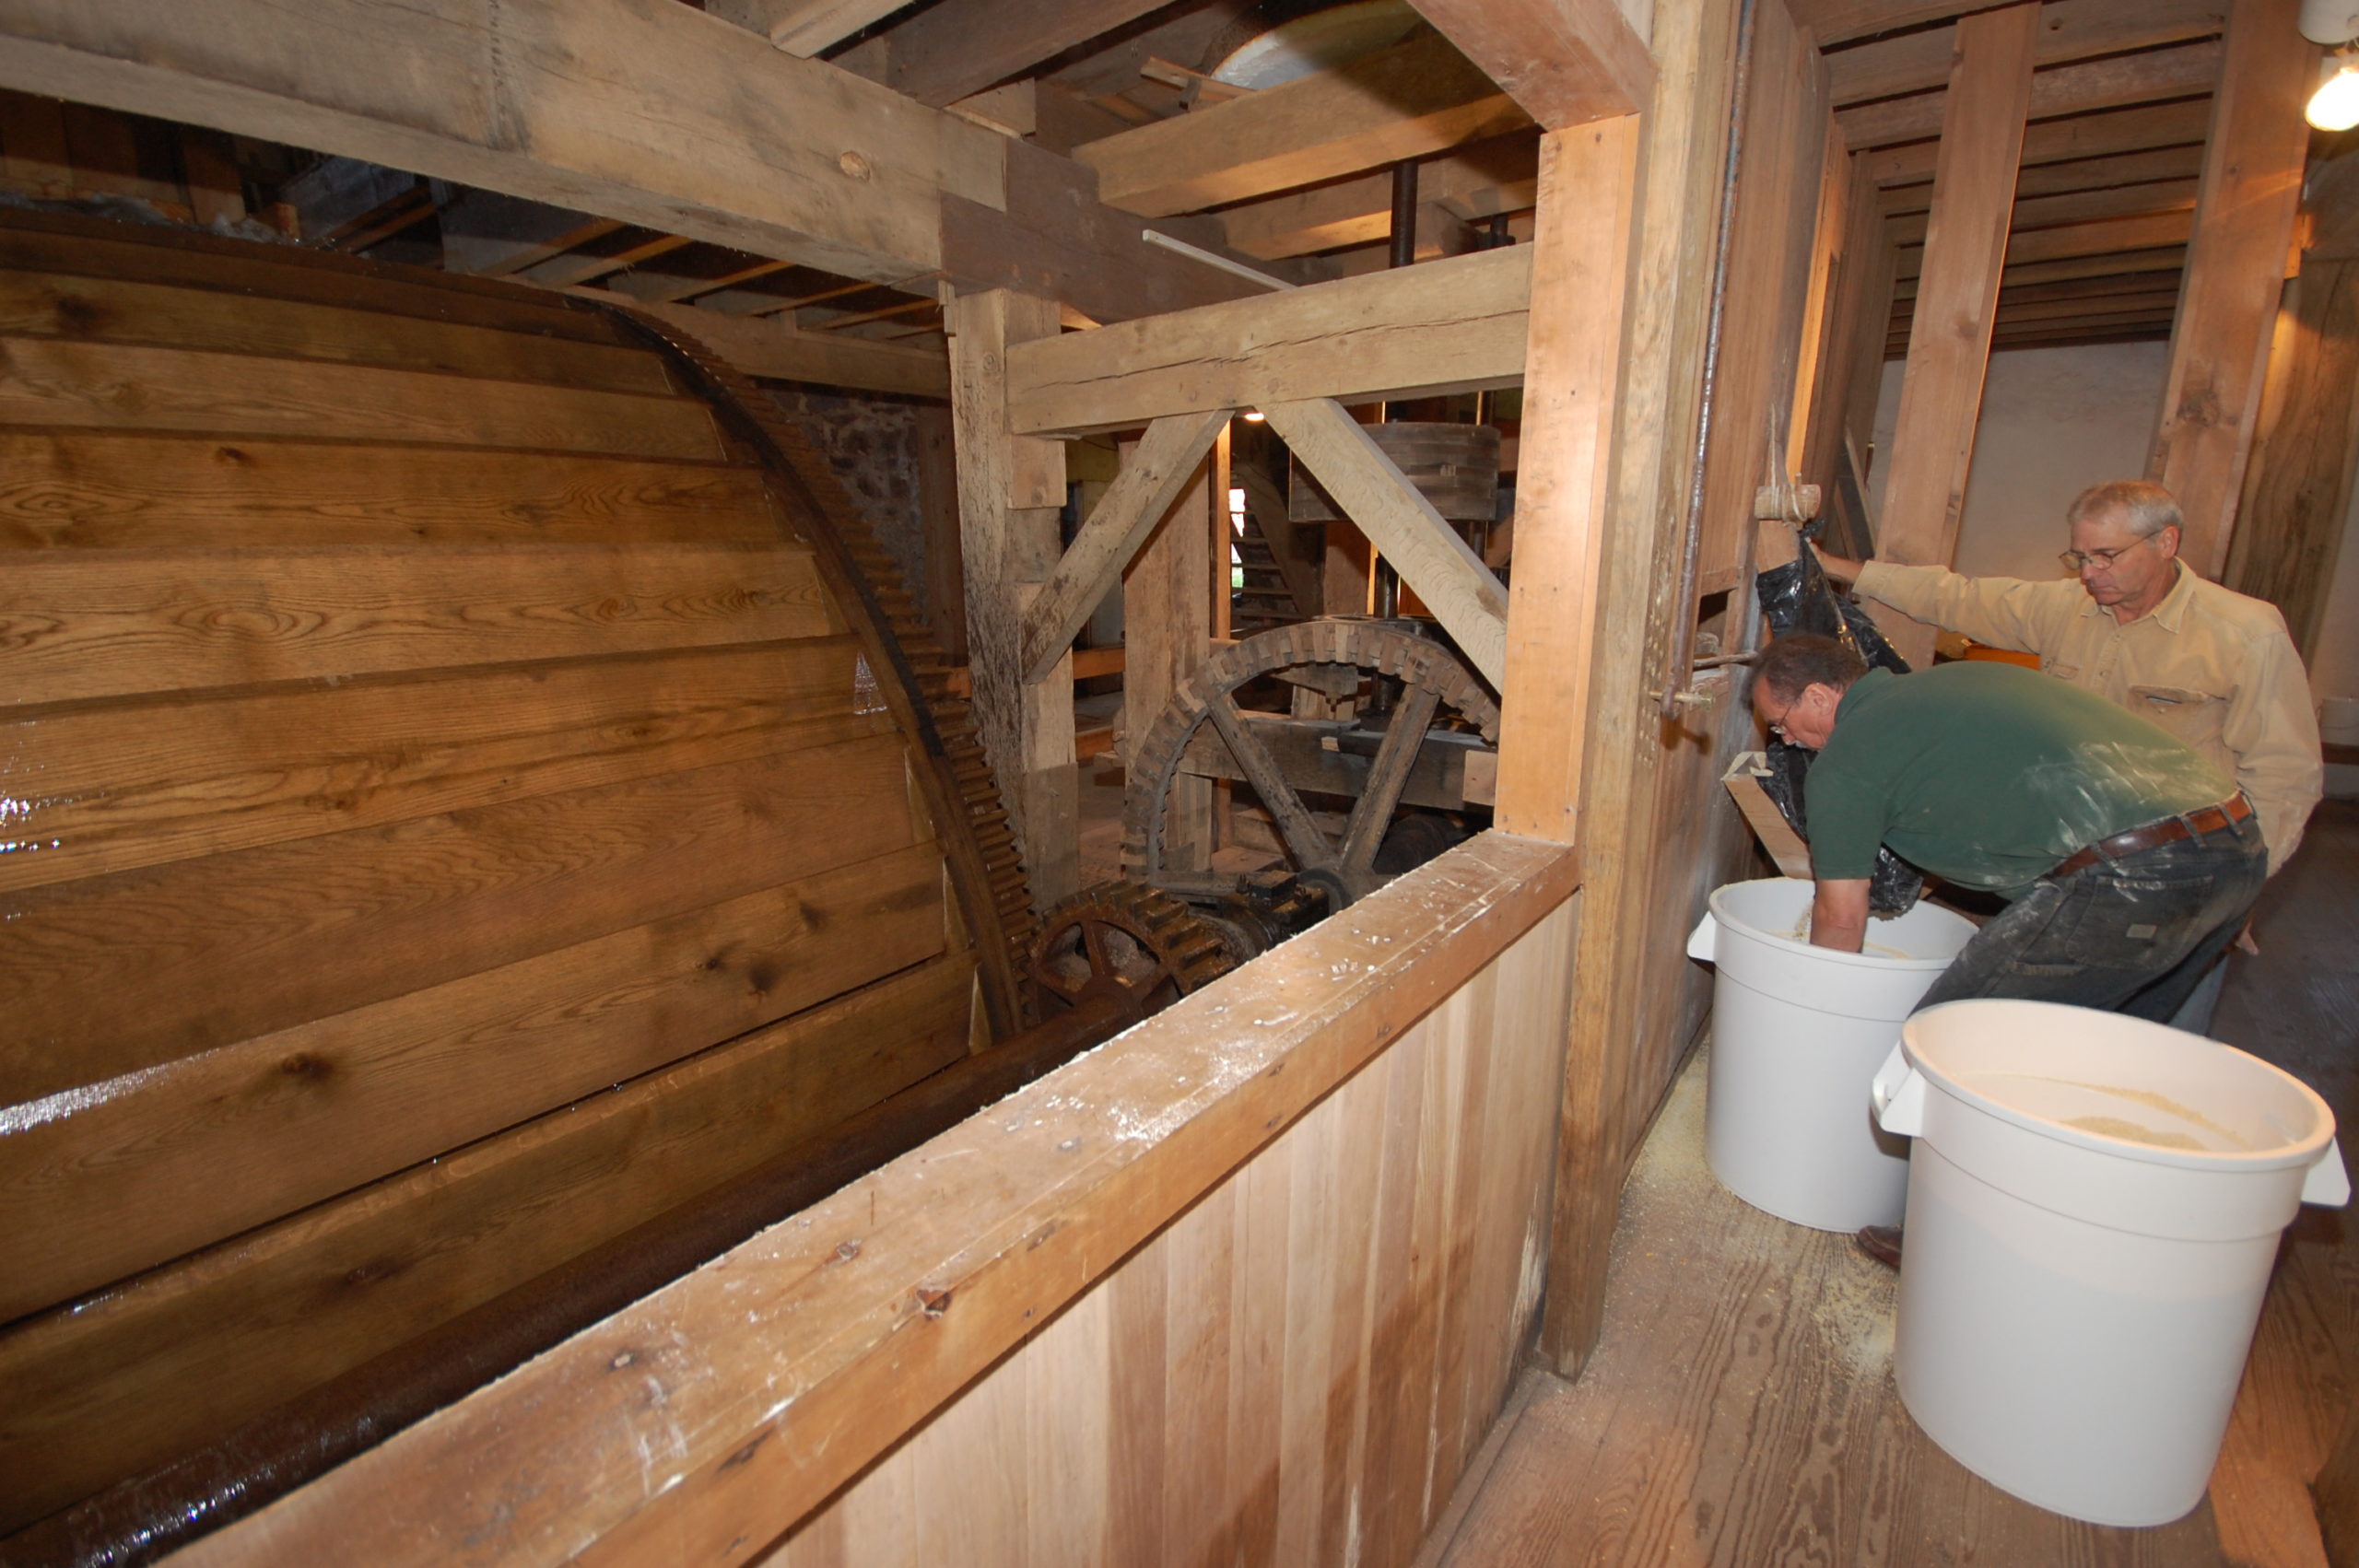 Grist mill